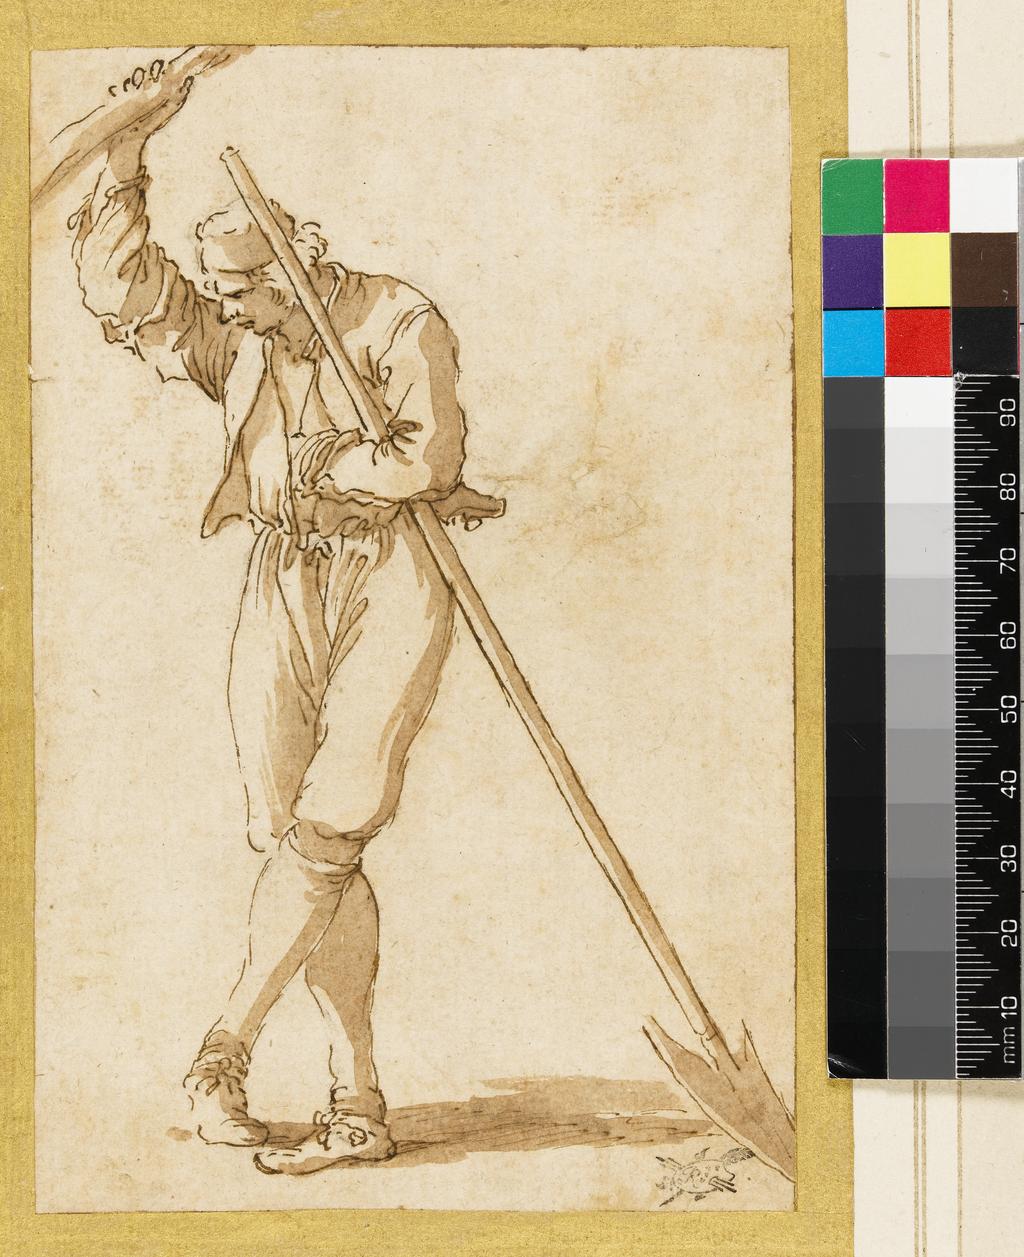 An image of Title/s: Young man leaning on a spade, holding a branch of a tree Maker/s: Rosa, Salvator (draughtsman) [ULAN info: Italian artist, 1615-1673]Technique Description:  pen and brown ink, brown wash, on paper, stuck downDimensions: height: 157 mm, width: 112 mm